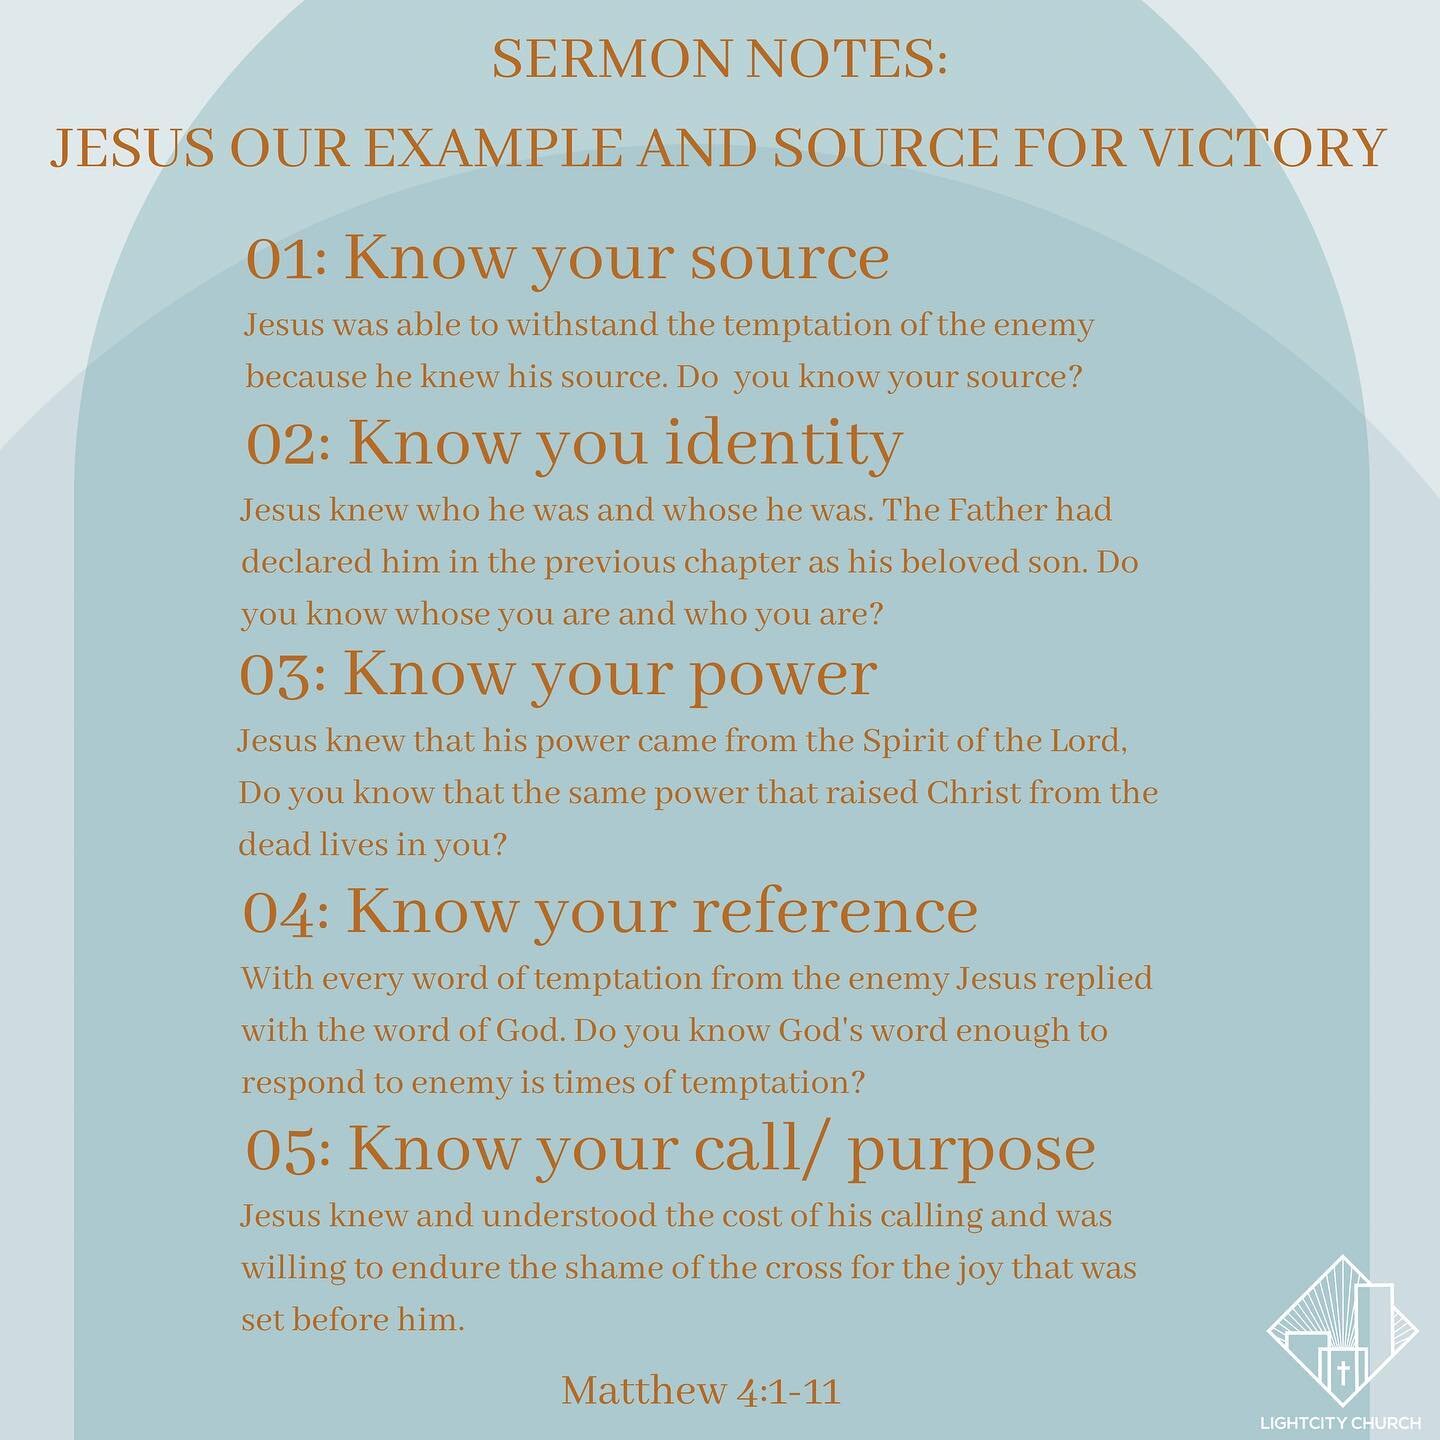 Sermon notes: Jesus our example and source for victory! 
&bull;
Join us online today for a wonderful word !
&bull;
&bull; 
#LCC #LCCSurrey #LCCsundays #worship #prayer #praise #church #sutton #localchurch #crossequalslove #thykingdomcome #prayer #pra